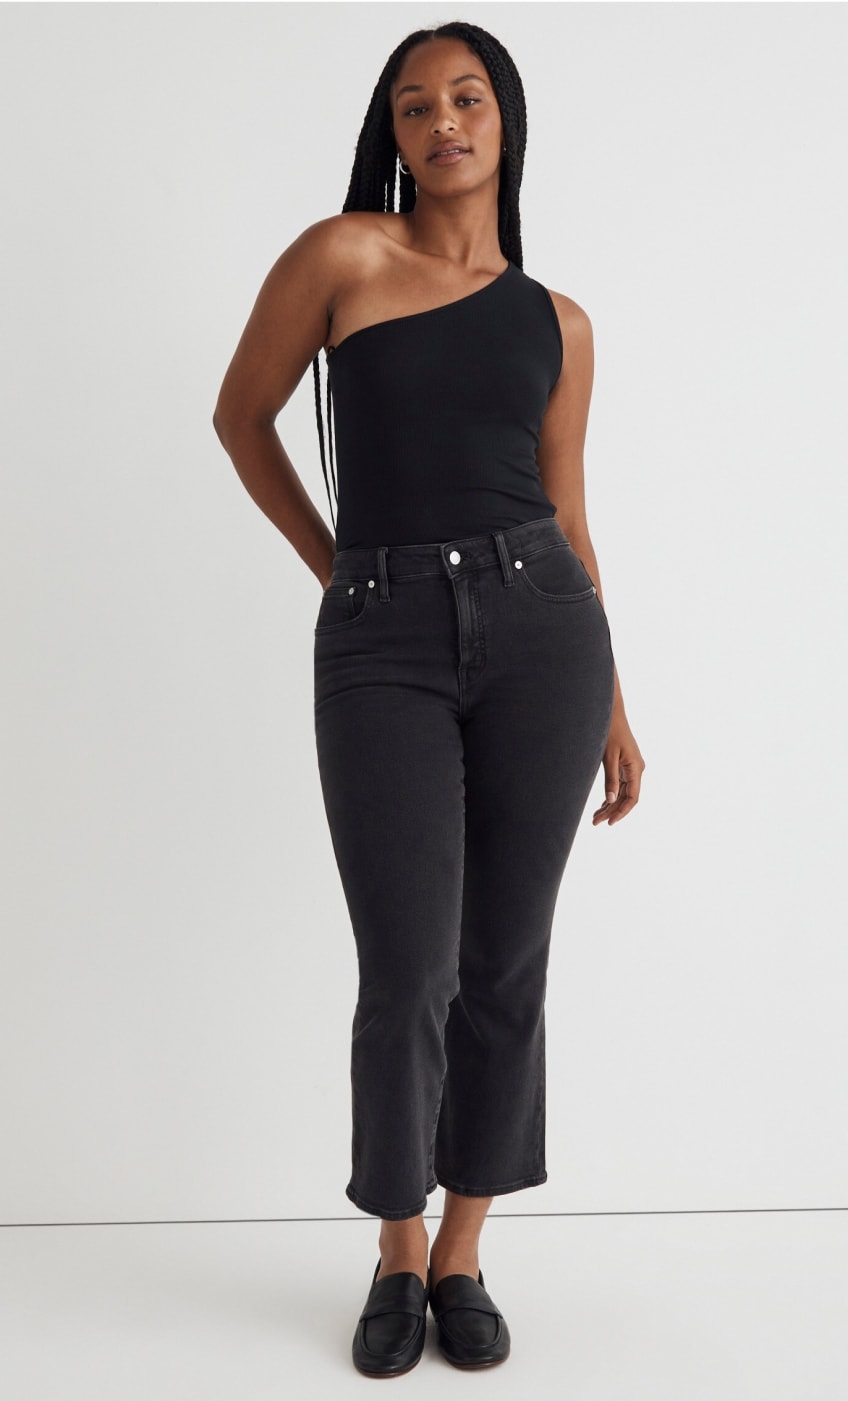 Madewell launches Curvy Shop